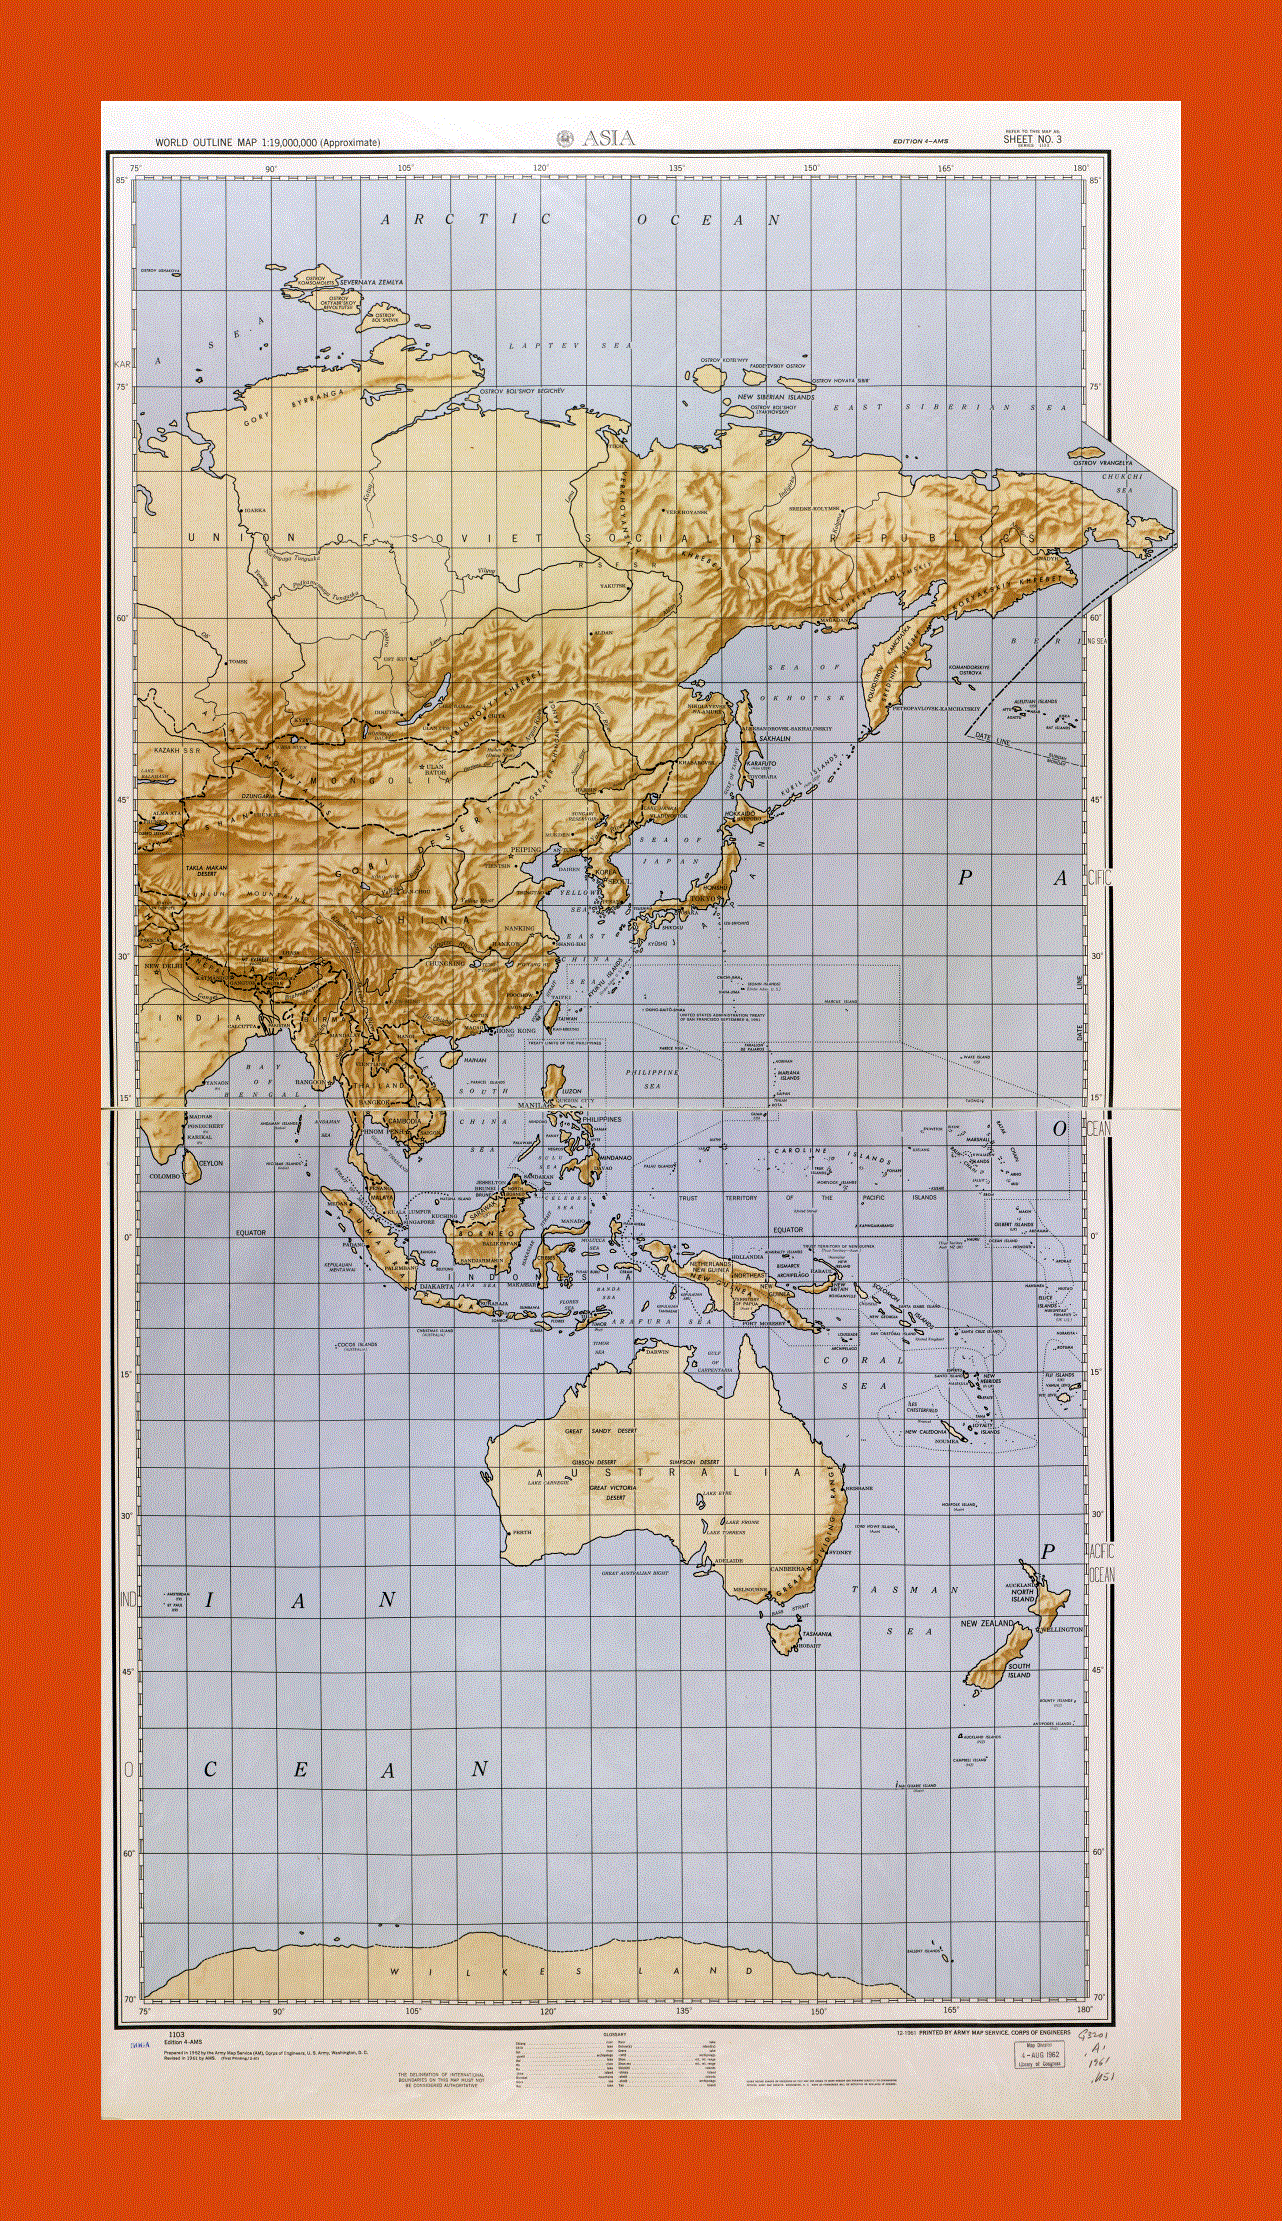 World outline map - part 3 (Asia) 1961-62